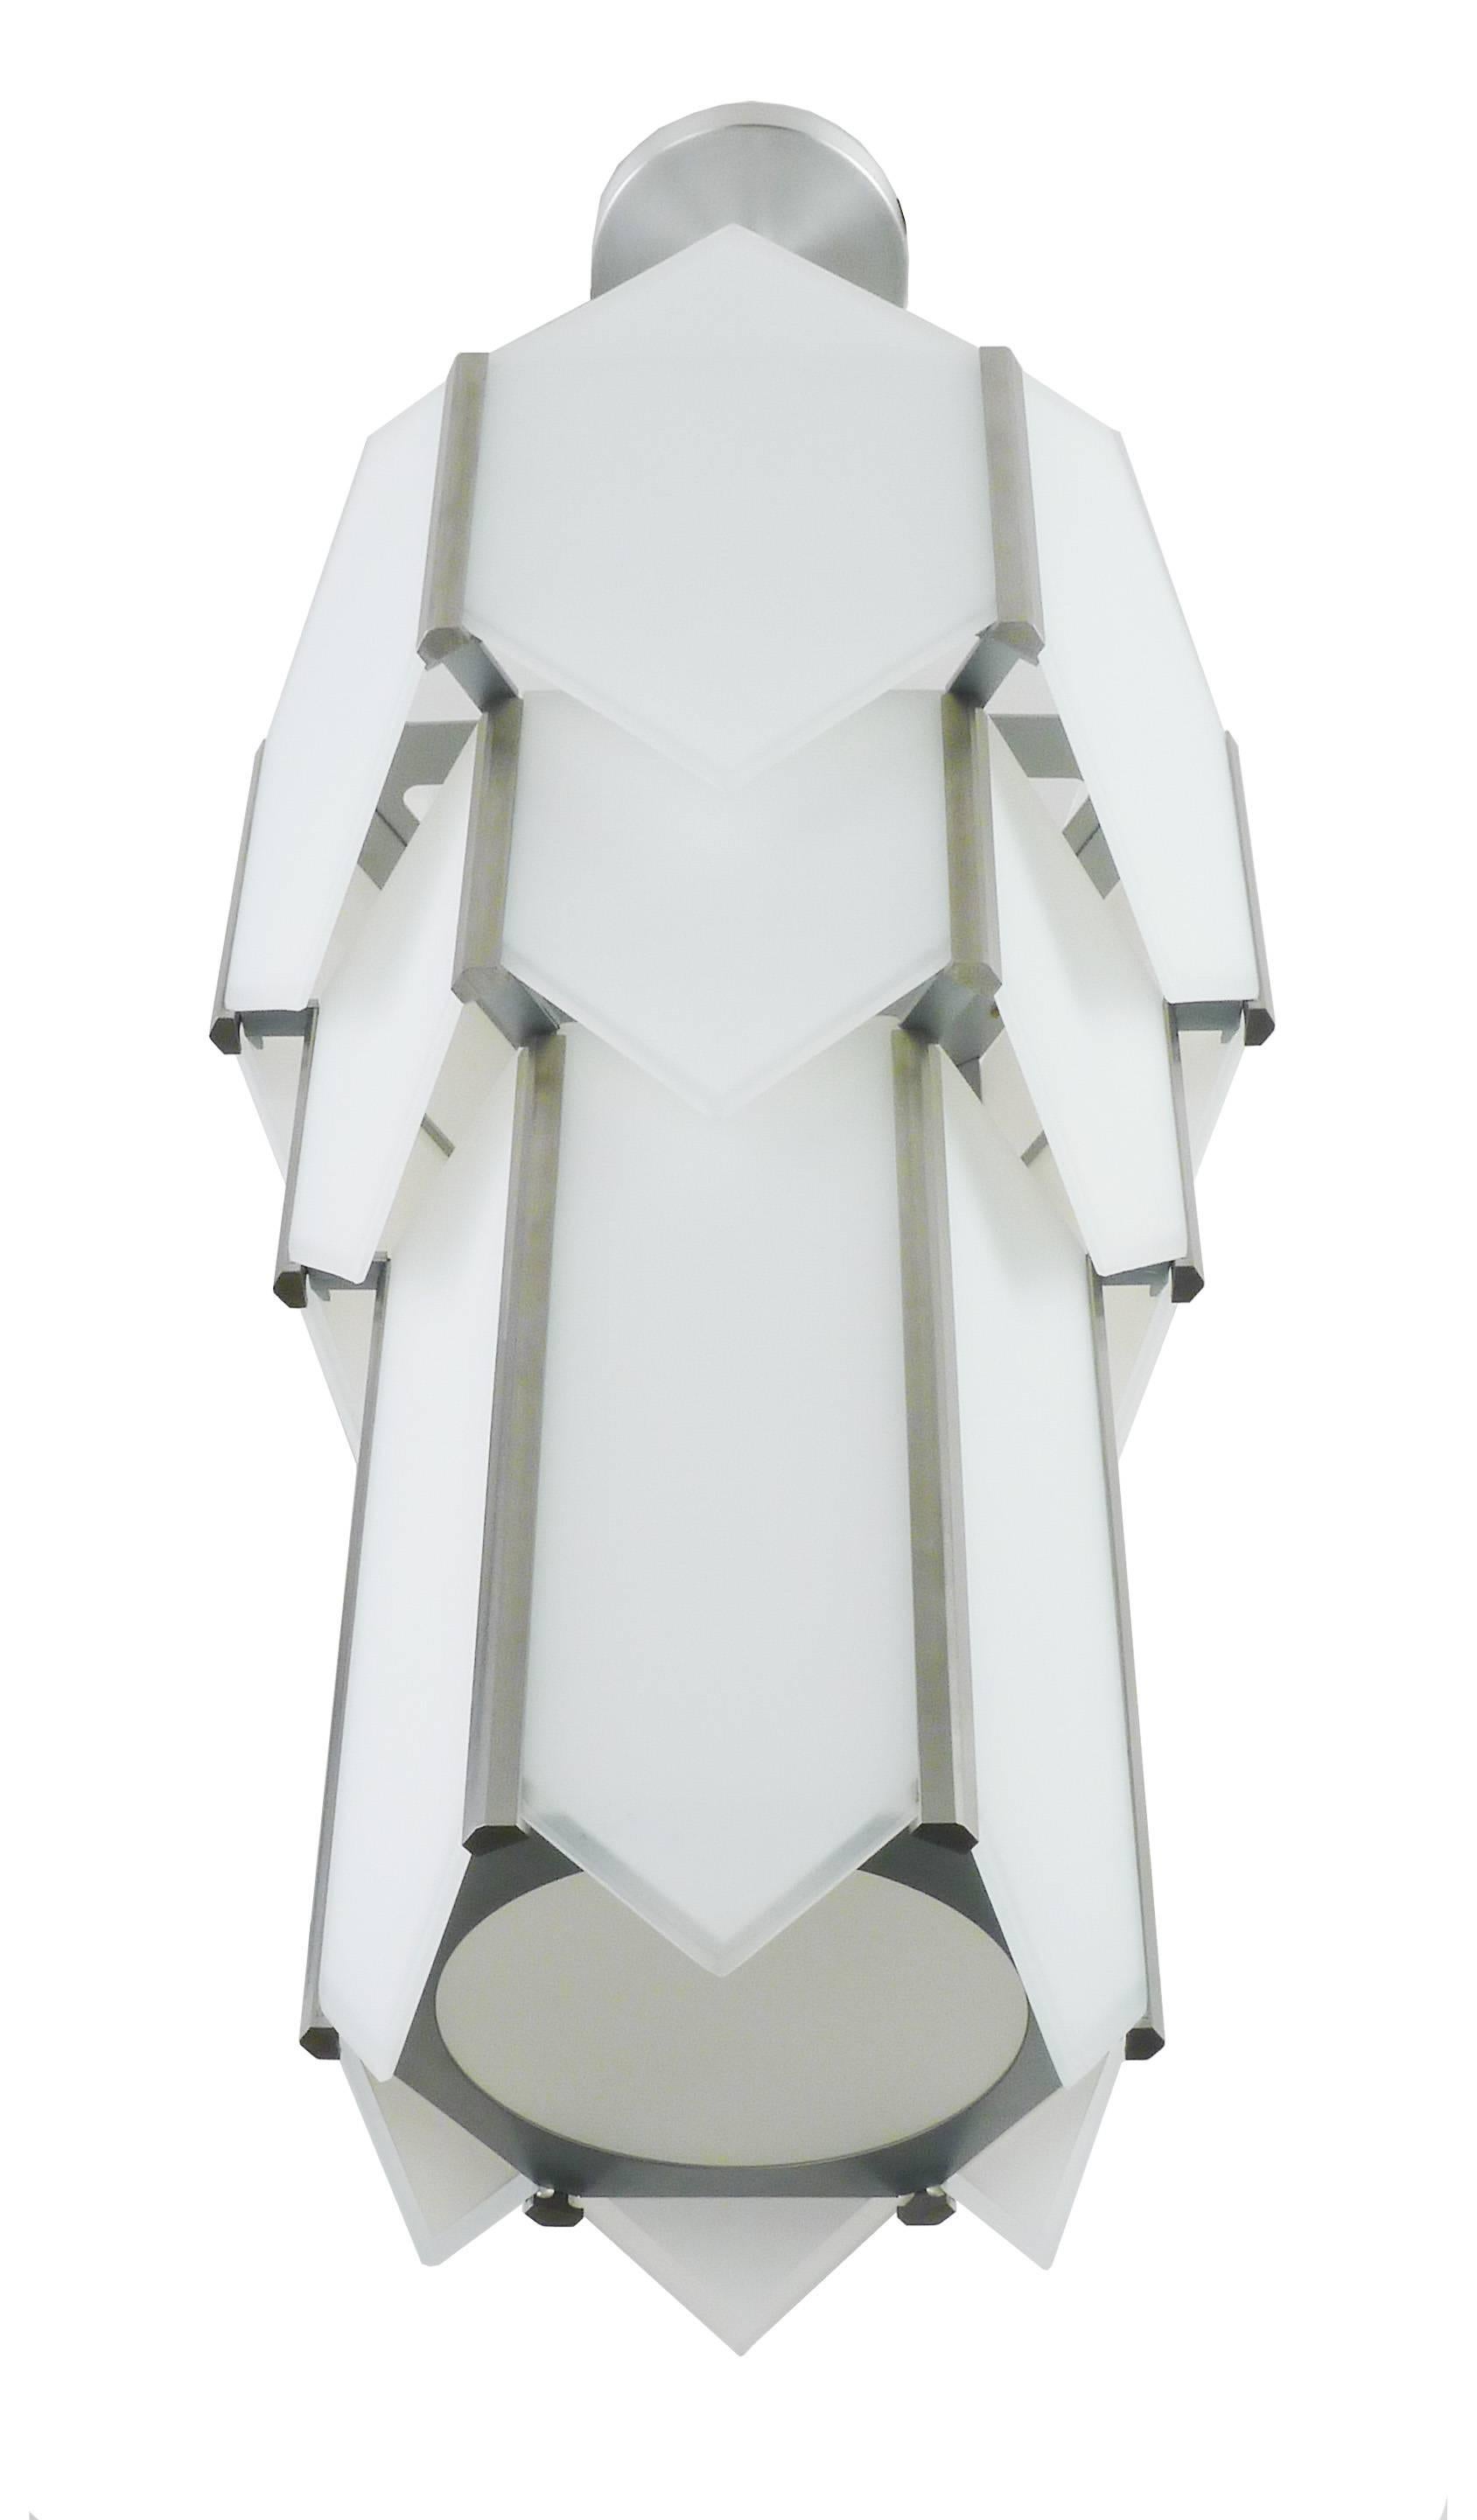 Stainless steel metal hexagonal chandelier with white glass panels. Glass panels have a 1/4 inch clear edge detail. Bottom has a circular opening with clear frosted glass. Incandescent lamping up to 100 watts.

Architect, Sandy Littman of Duesenberg